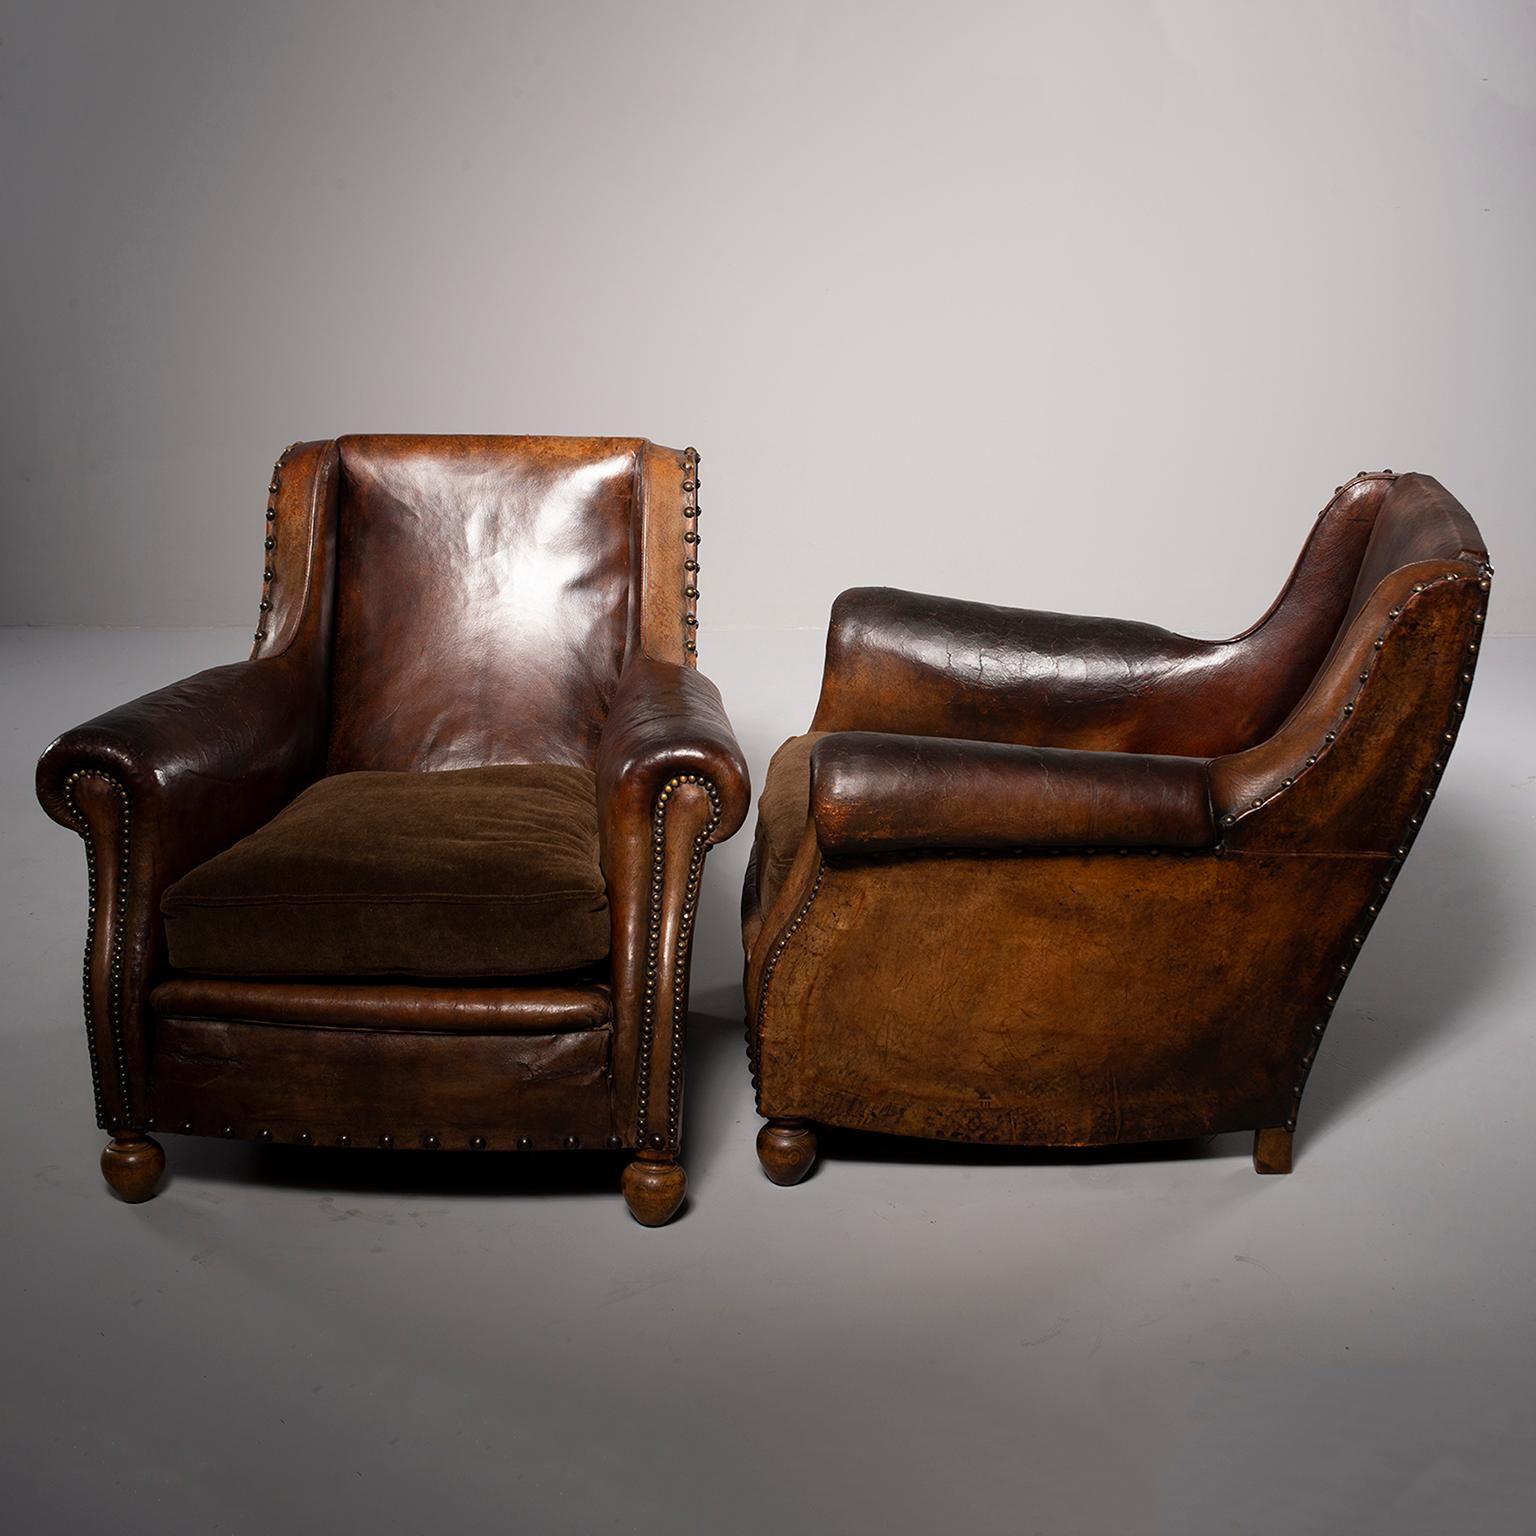 Pair of French leather club chairs with wood frames. Chairs feature subtle side wings, rolled arms, exposed wood frames, brass nailhead trim and bun feet. Original dark brown leather upholstery with newly upholstered brown alpaca velvet seat